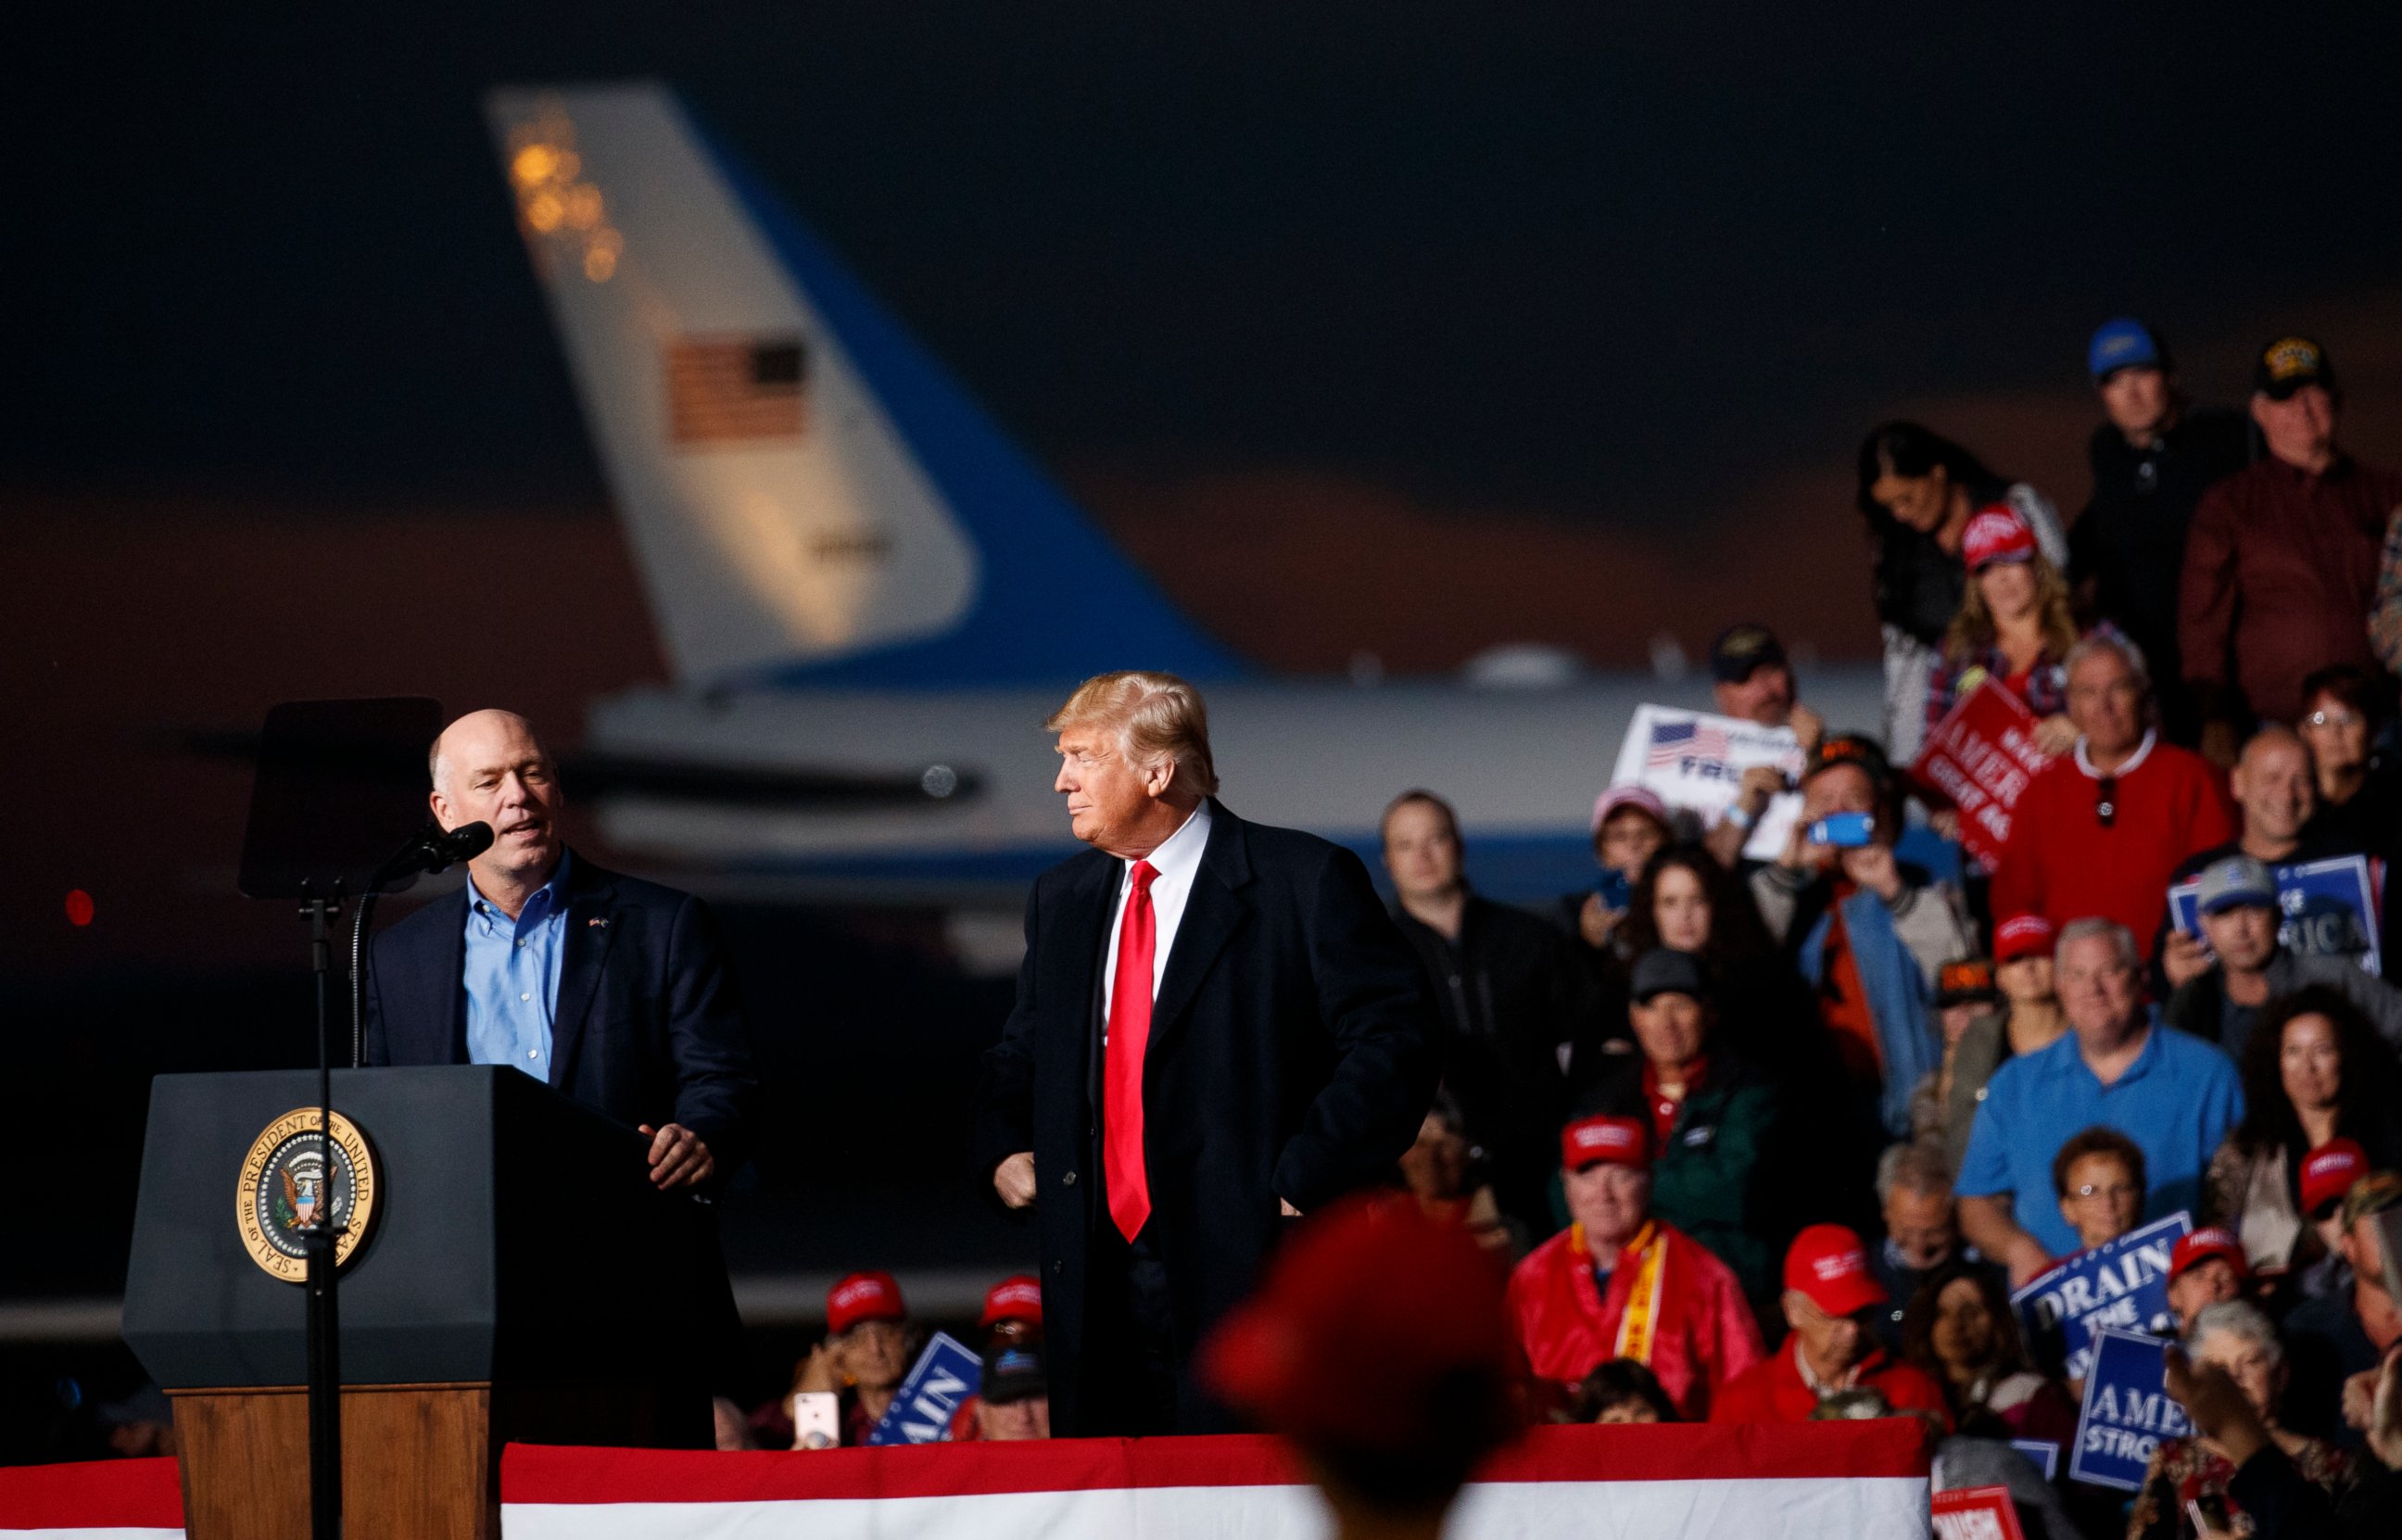 PHOTO: Rep. Greg Gianforte, R-Mont., speaks as President Donald Trump stands right during a campaign rally at Minuteman Aviation Hangar, Thursday, Oct. 18, 2018, in Missoula, Mont.